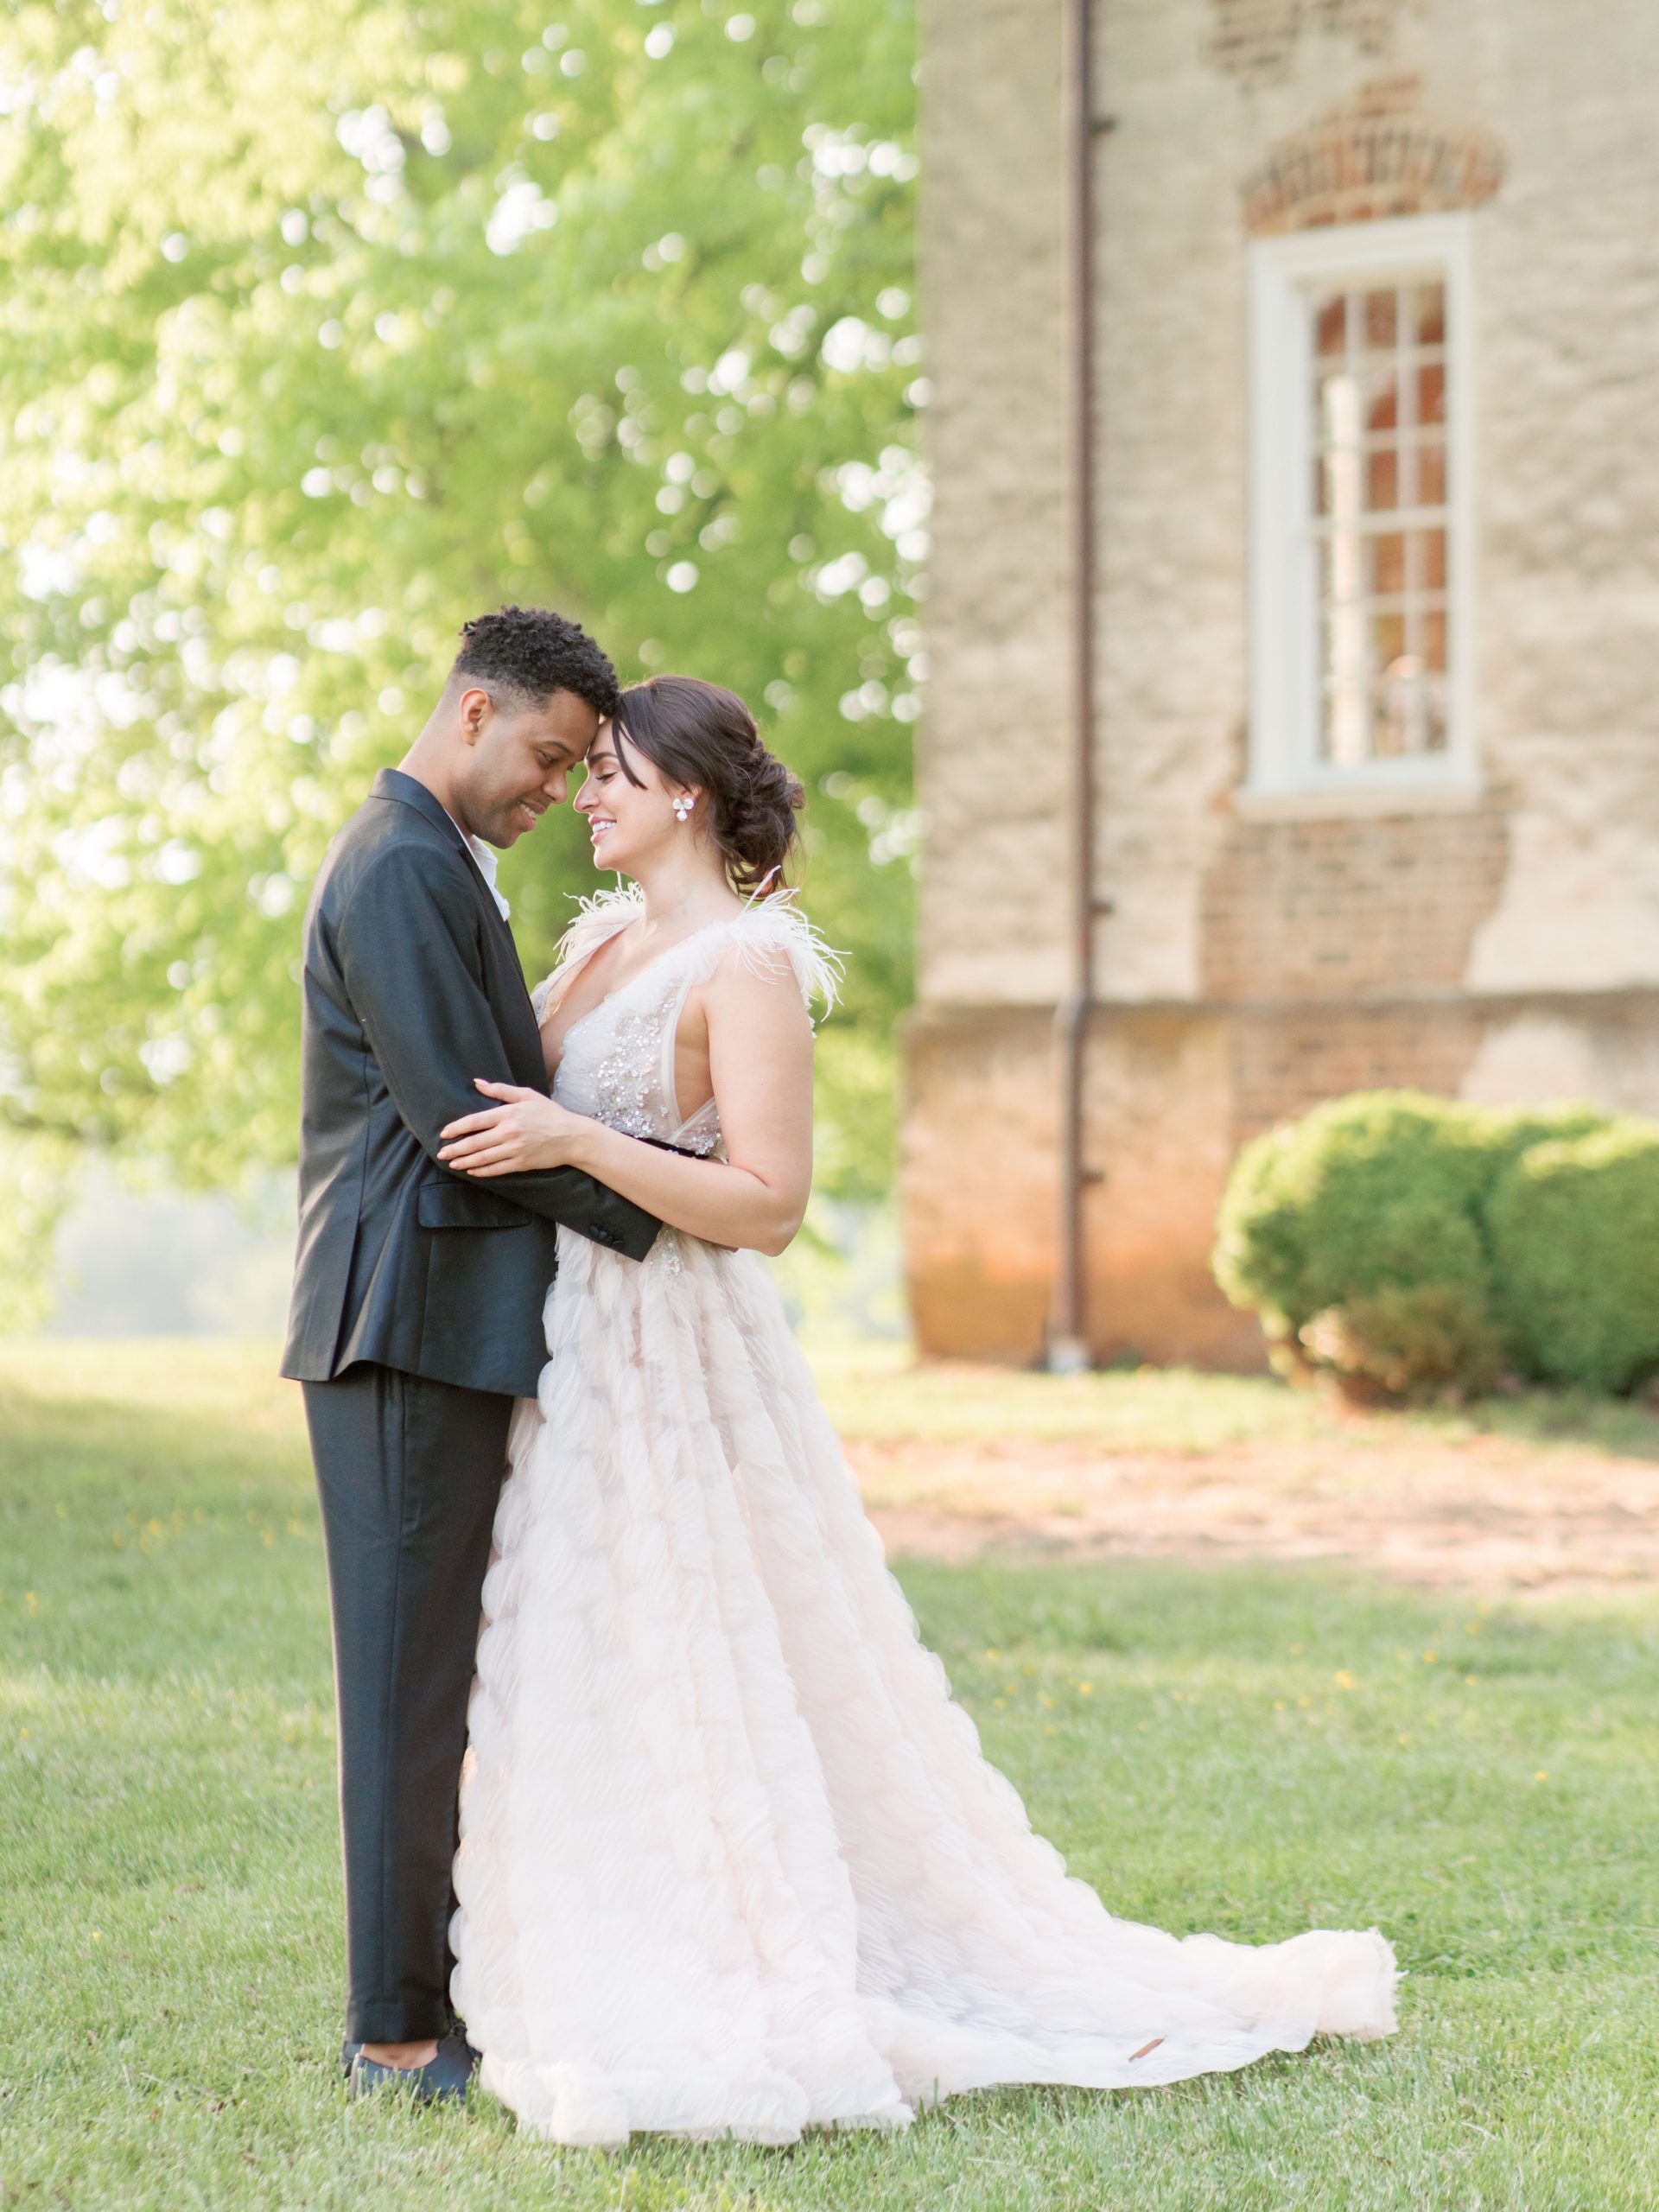 A refined wedding editorial at Historic Salubria in Virginia. Captured by Washington, DC wedding photographer, Alicia Lacey.